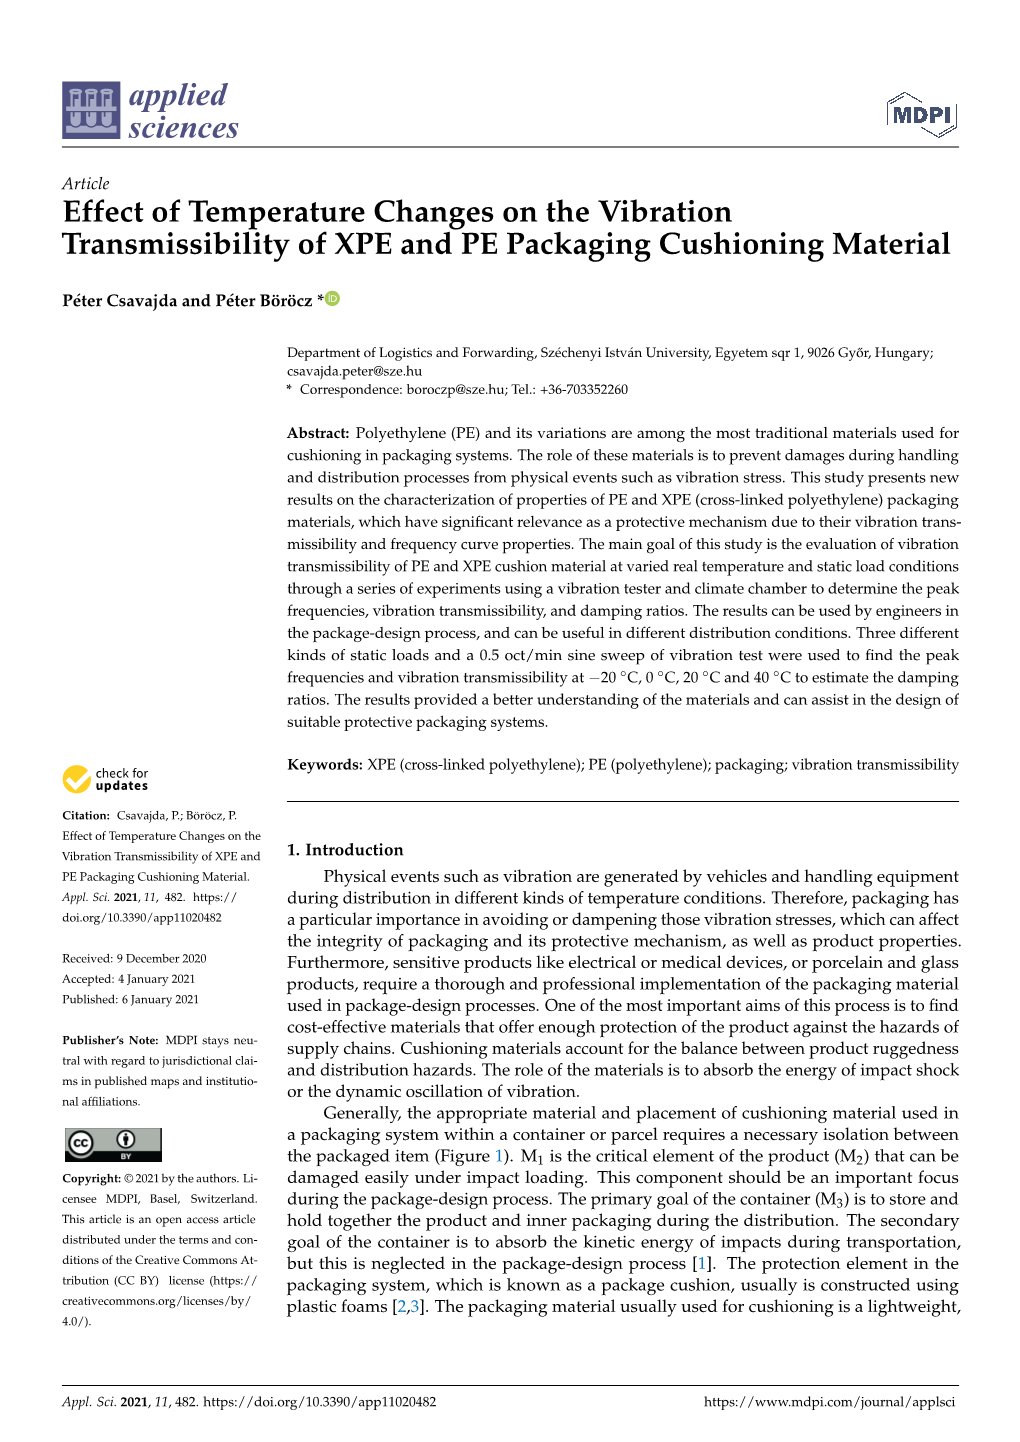 Effect of Temperature Changes on the Vibration Transmissibility of XPE and PE Packaging Cushioning Material